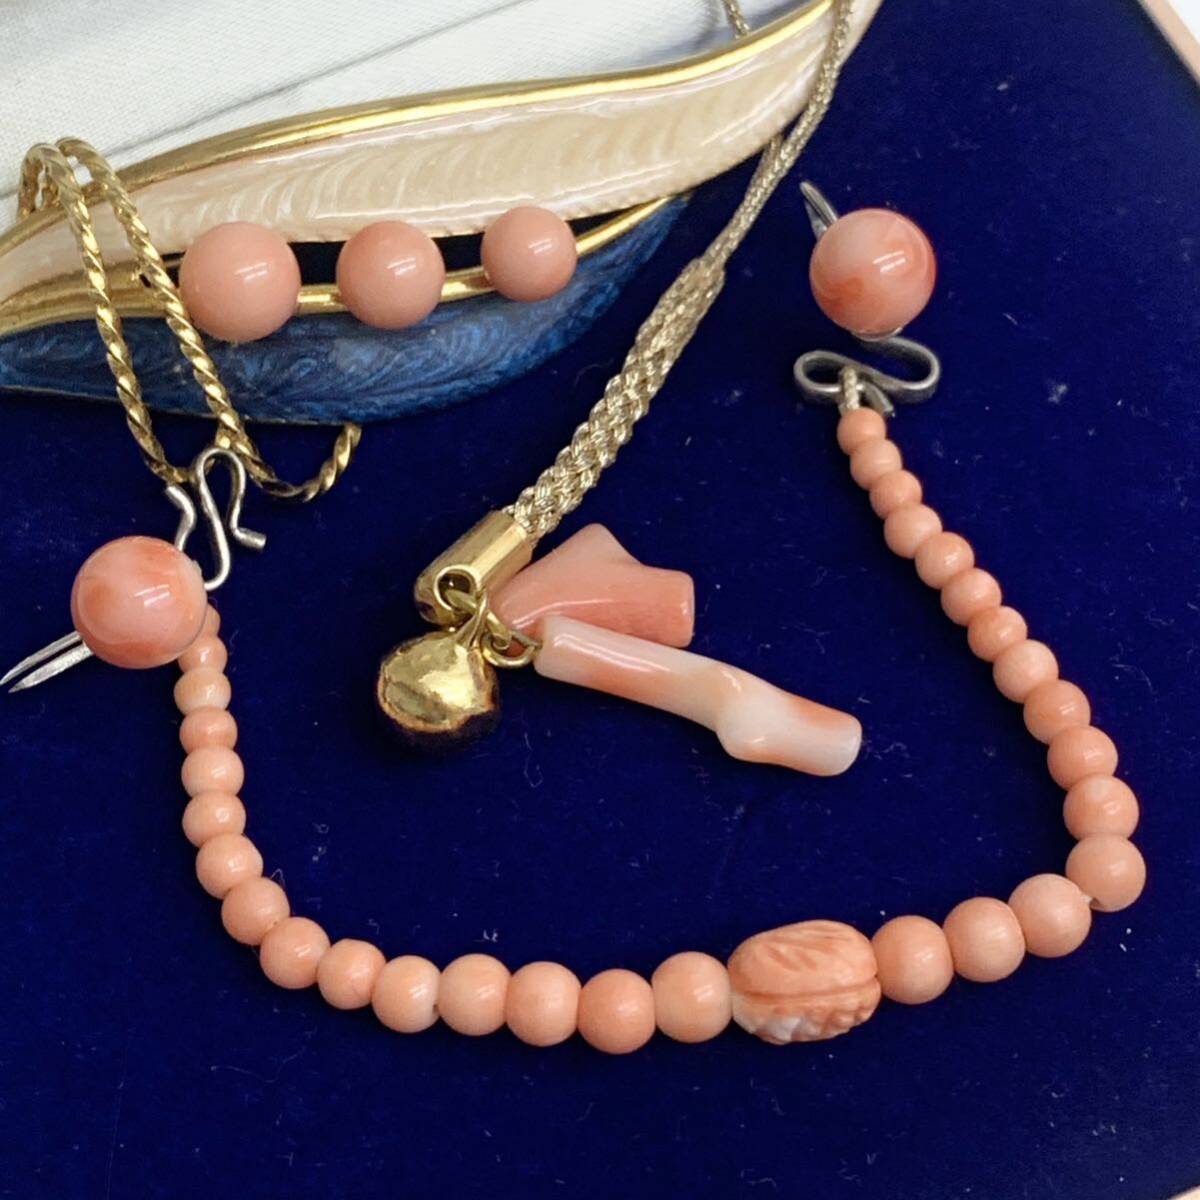 1 jpy ~! accessory summarize mountain gross weight 489.5g.. coral clock necklace Olympic memory brooch pendant ring tiepin 